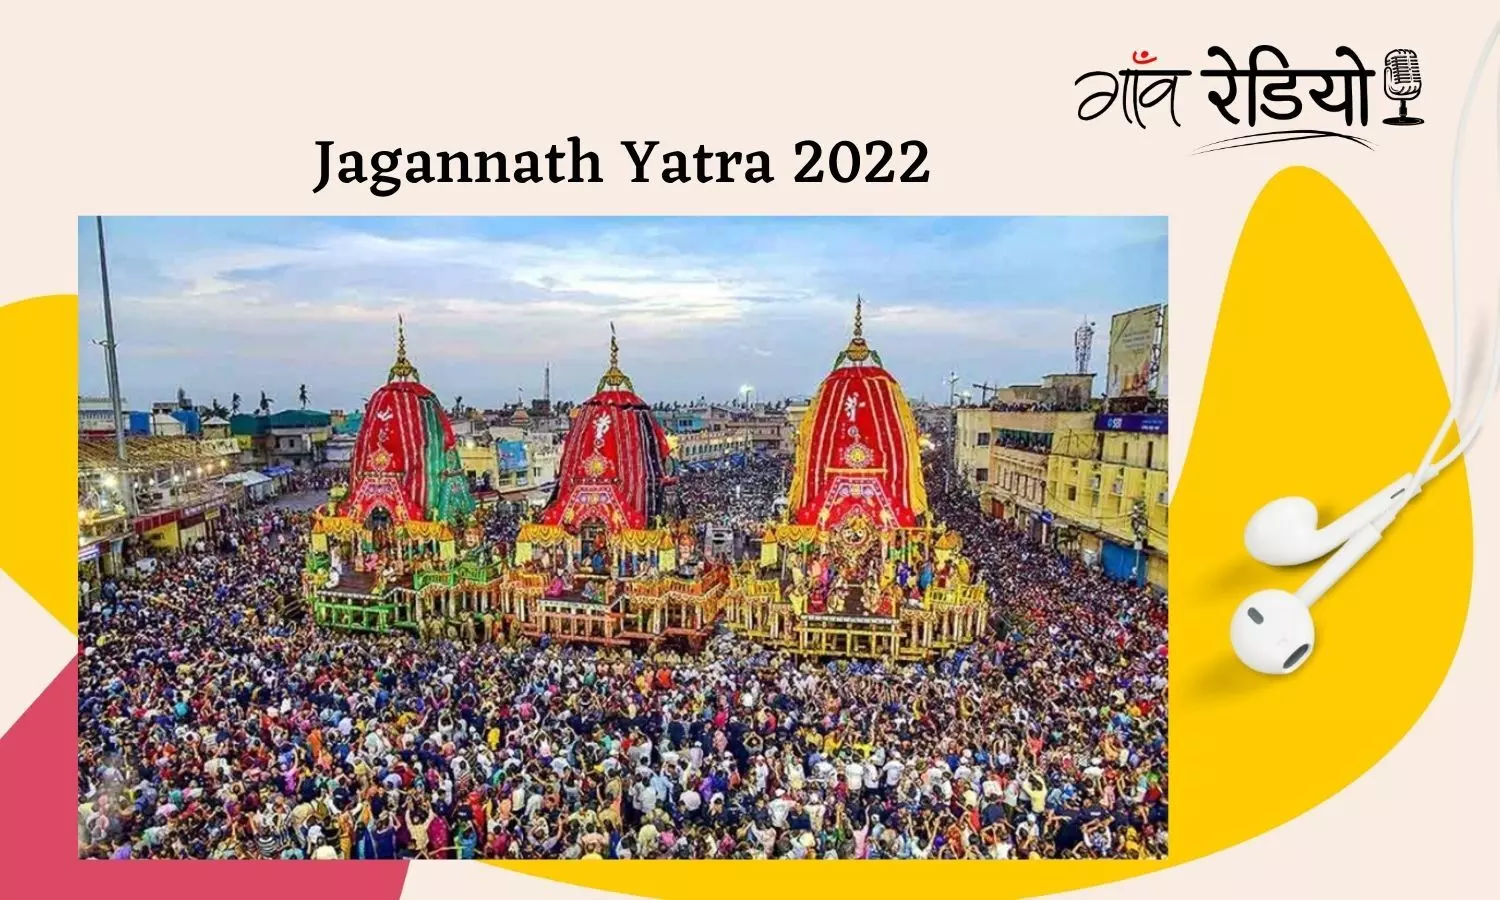 Gaon Radio: History, cultural significance, and celebrations of the Rath Yatra